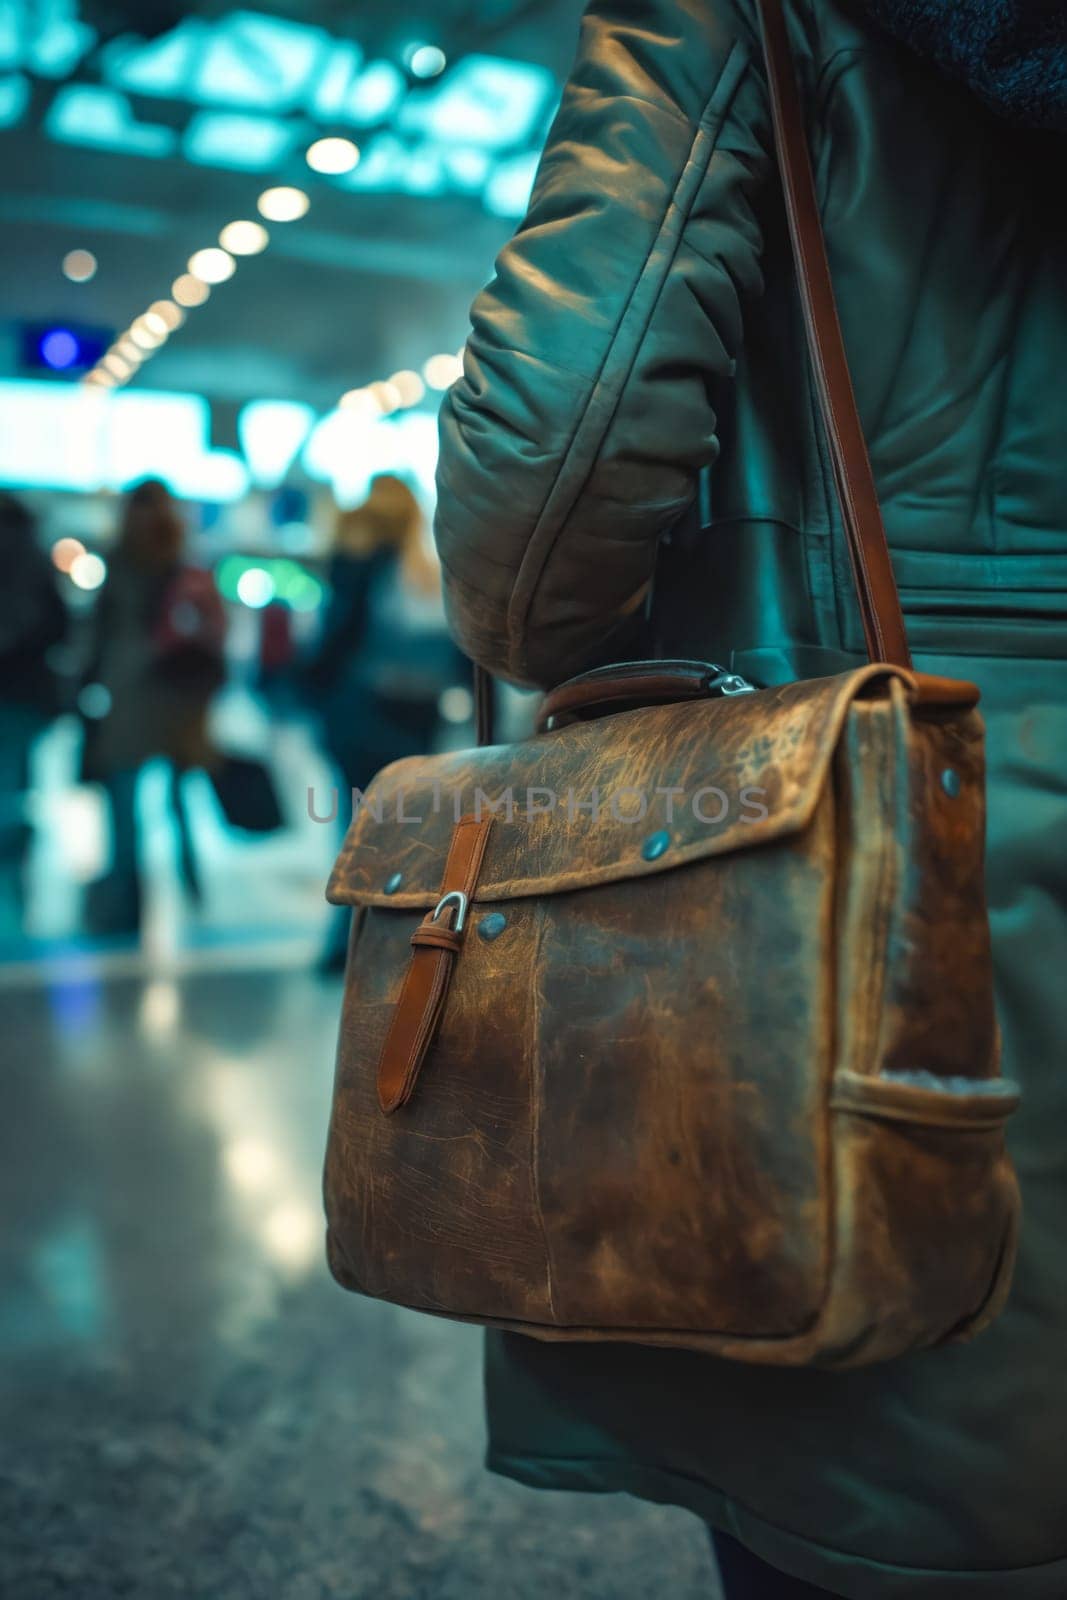 A woman is holding a leather briefcase in a busy airport. The scene is bustling with people and luggage, creating a sense of urgency and movement. Generative AI